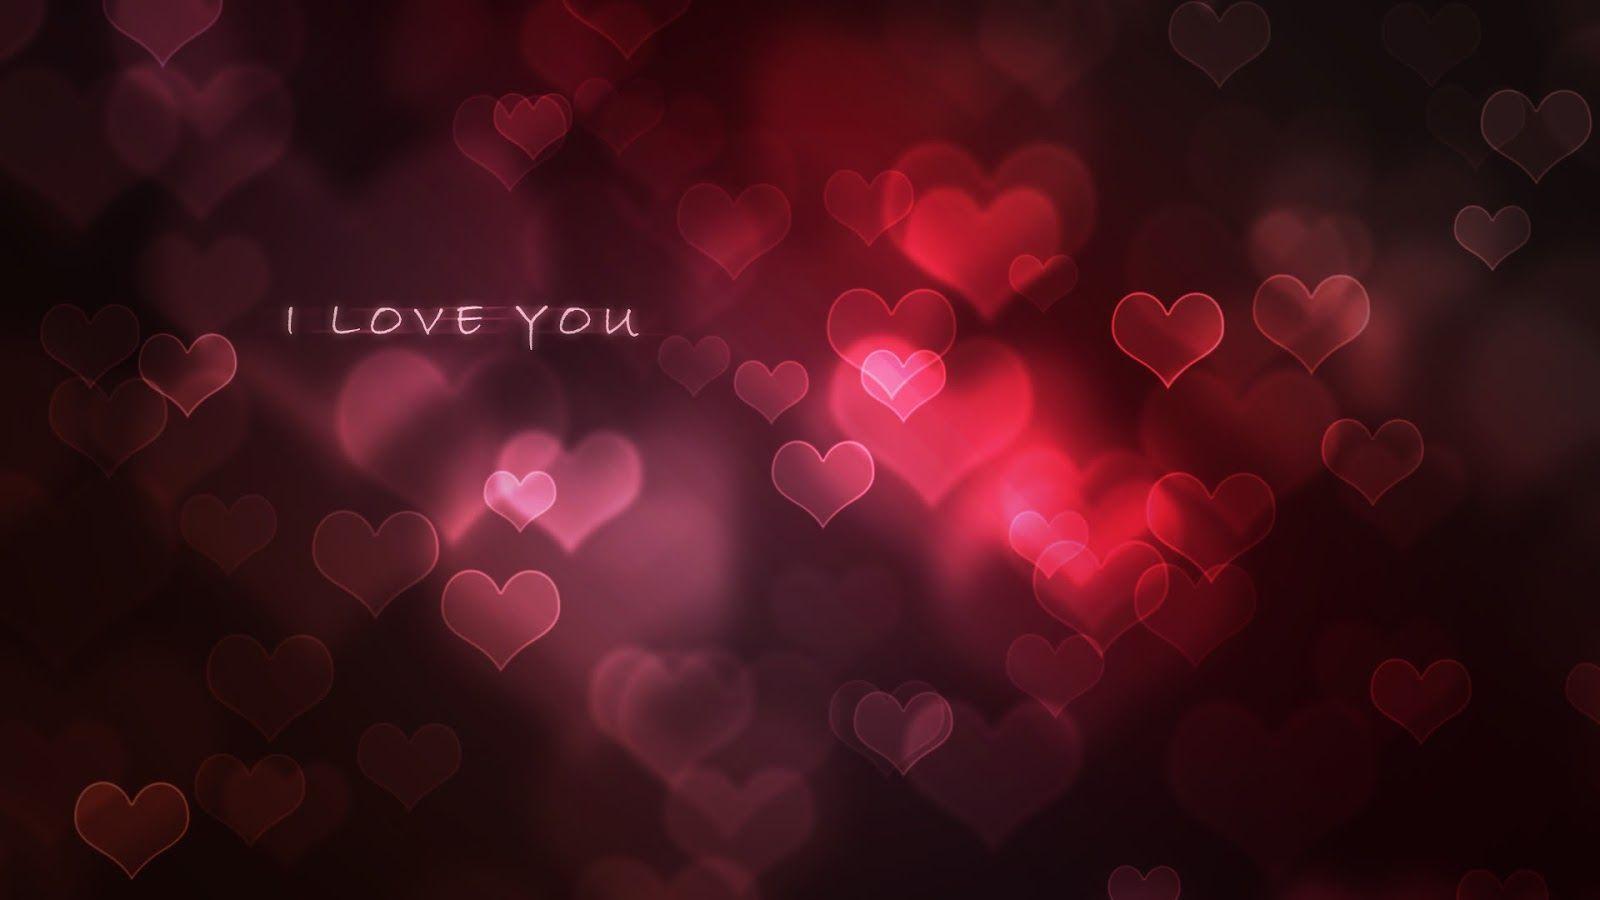 I Love You Image and HD Wallpaper 2016. Happy Valentine Day 2016